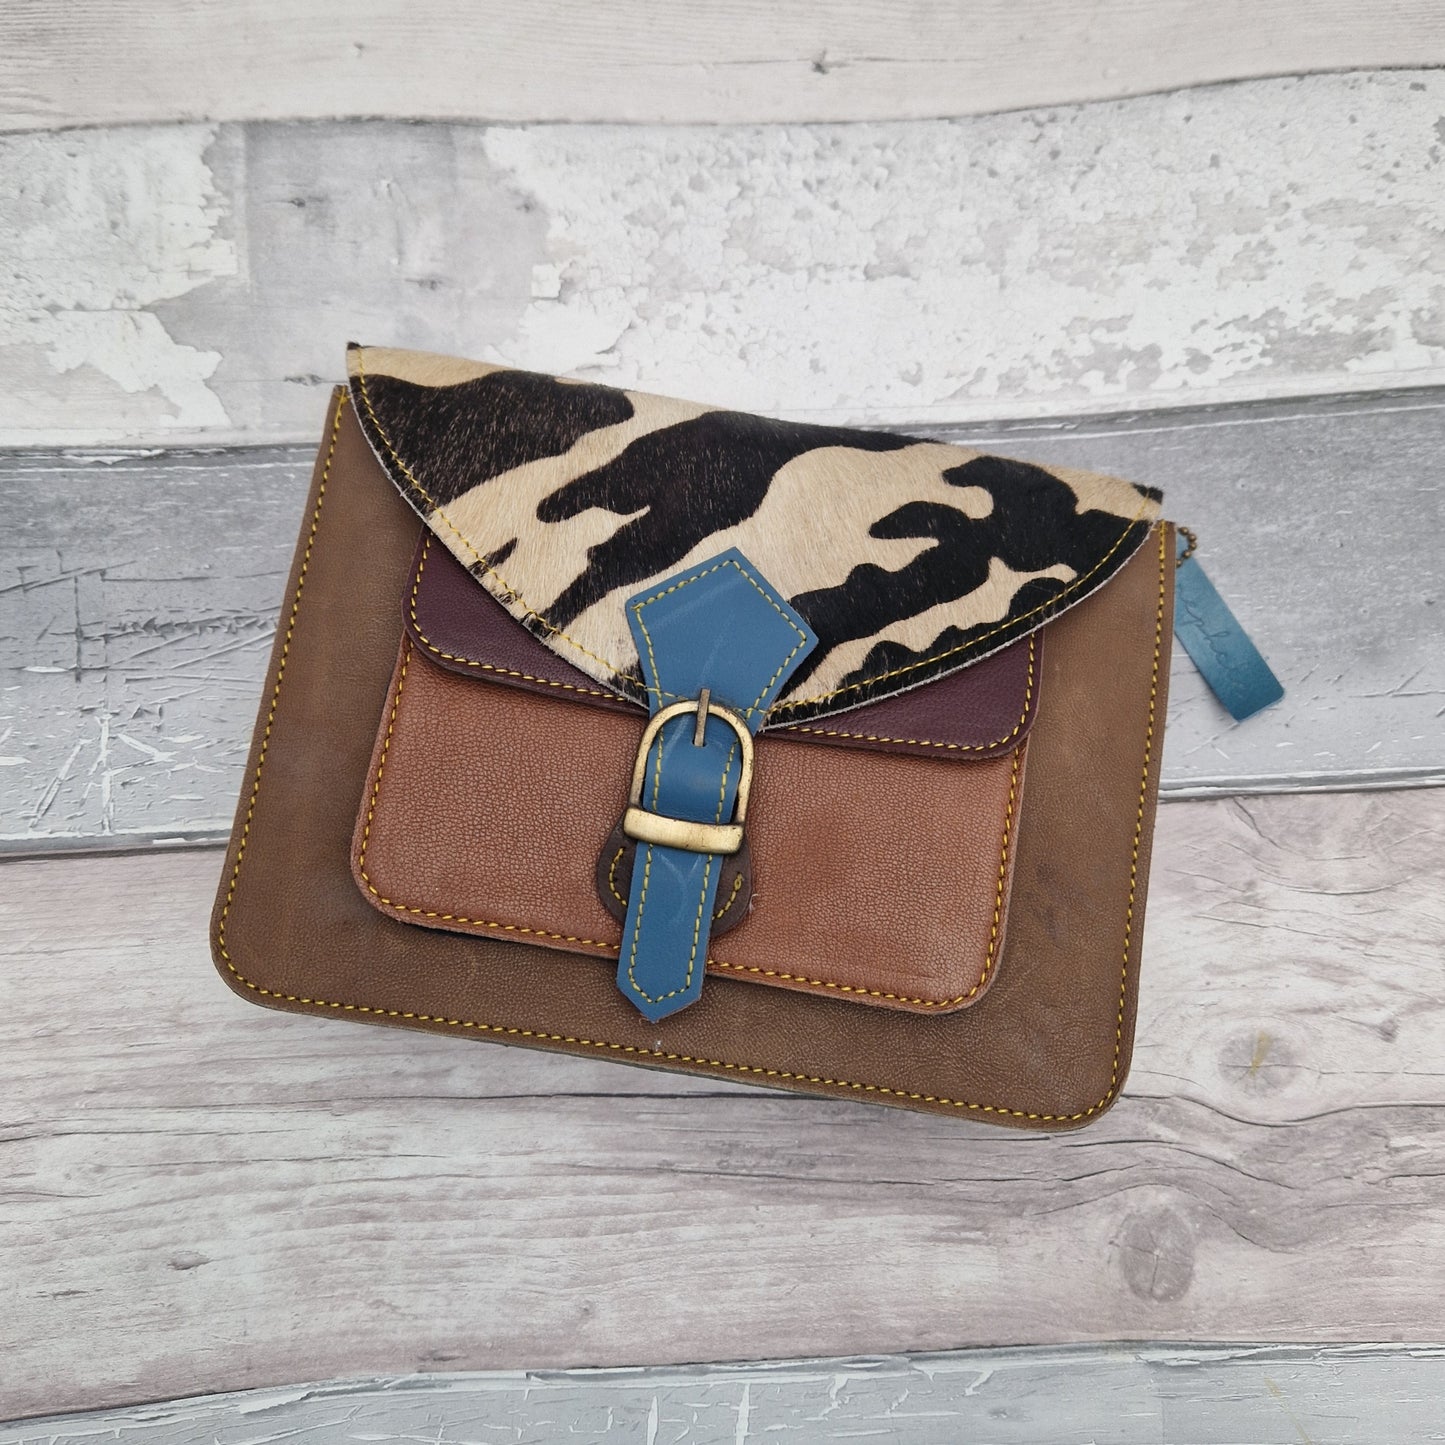 Brown leather satchel style bag with textured front panel in cow hide print.